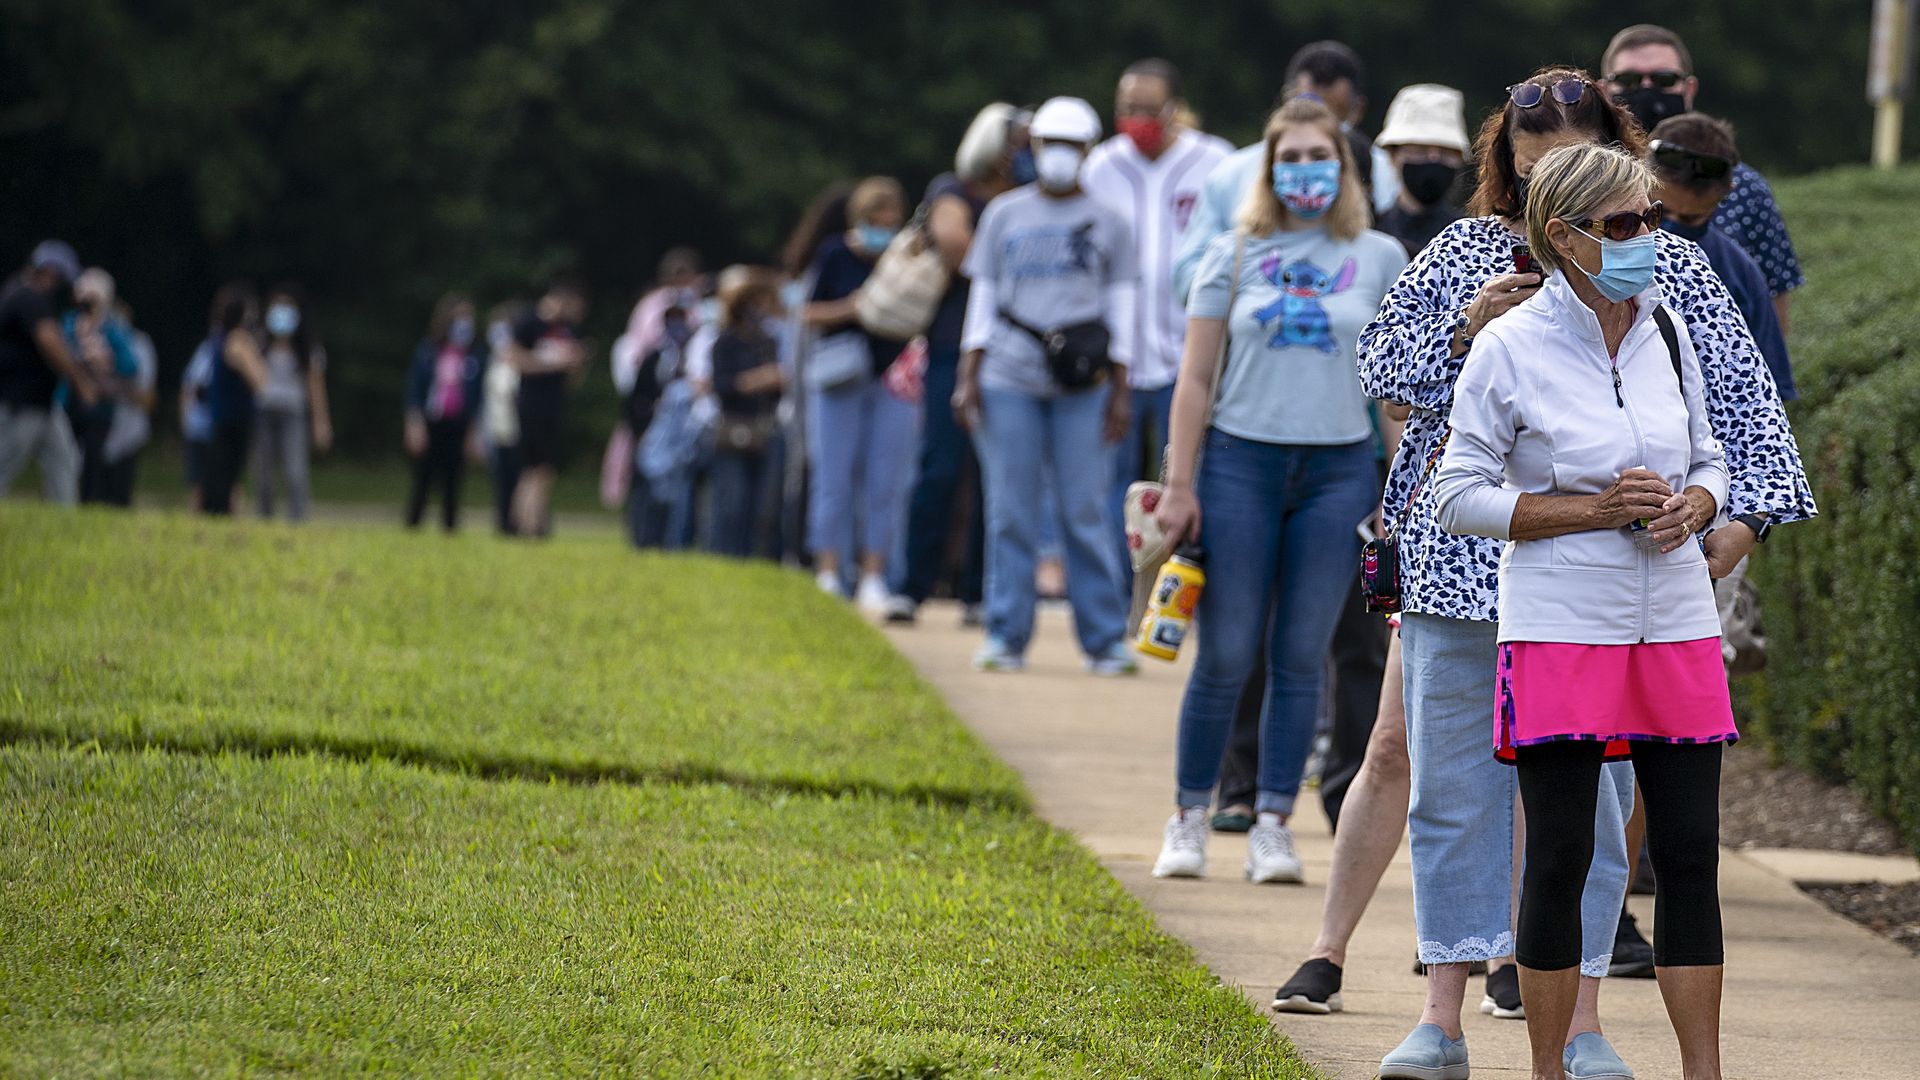  People stand on line, spaced six apart due to COVID-19, in order to vote early at the Fairfax Government Center on September 18, 2020 in Fairfax, Virginia.